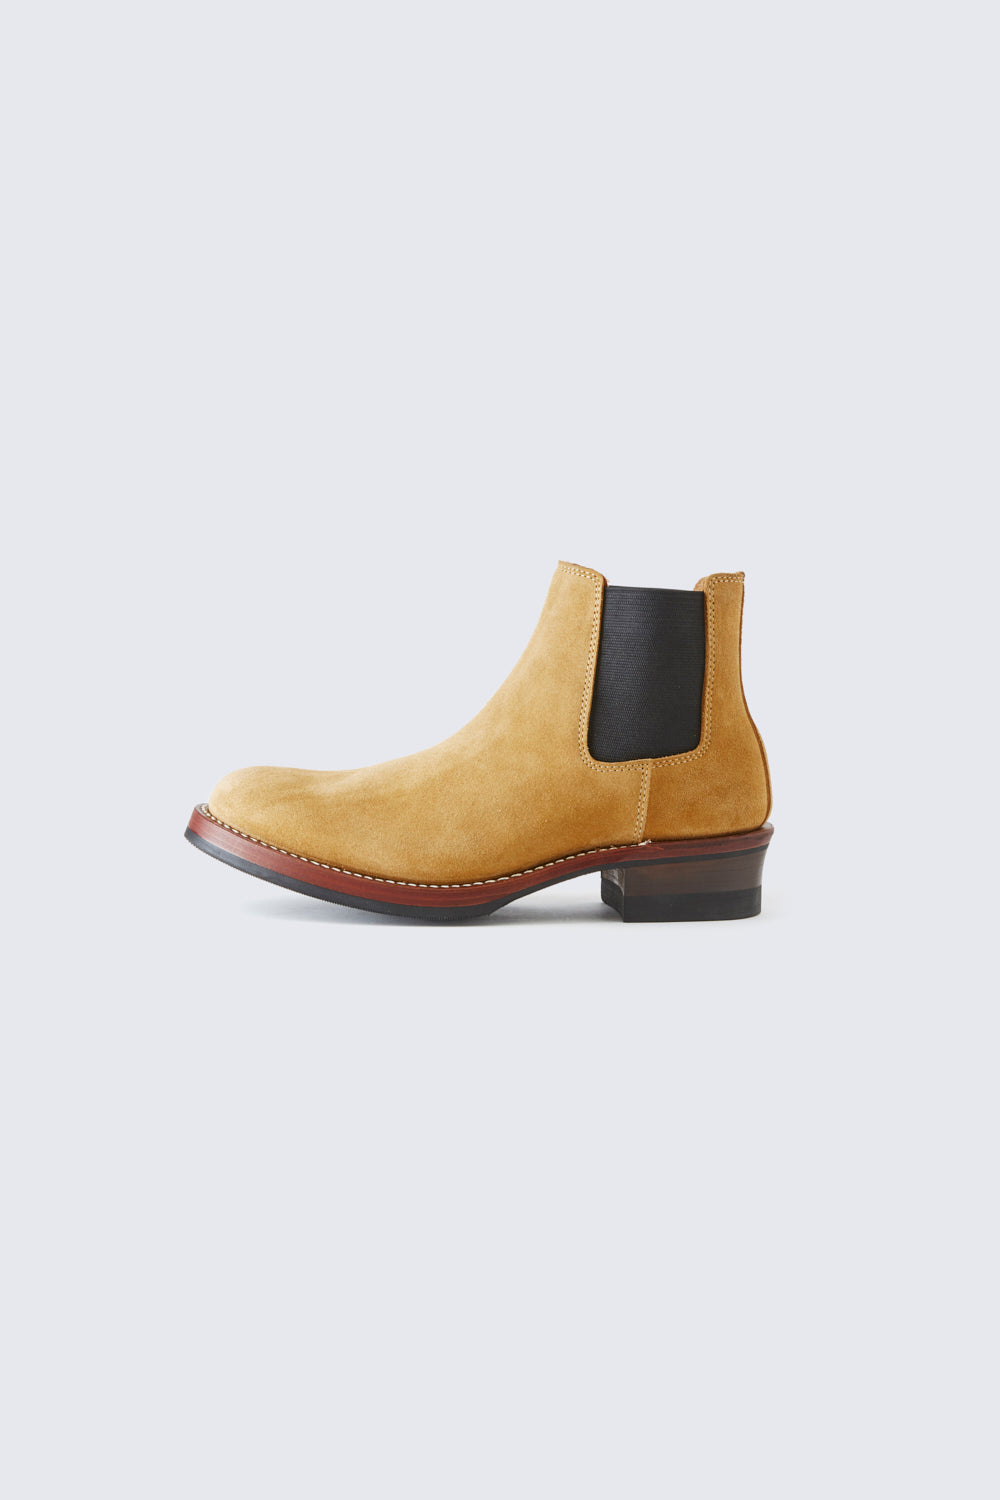 AB-03SS STEERHIDE SUEDE CHELSEA BOOTS